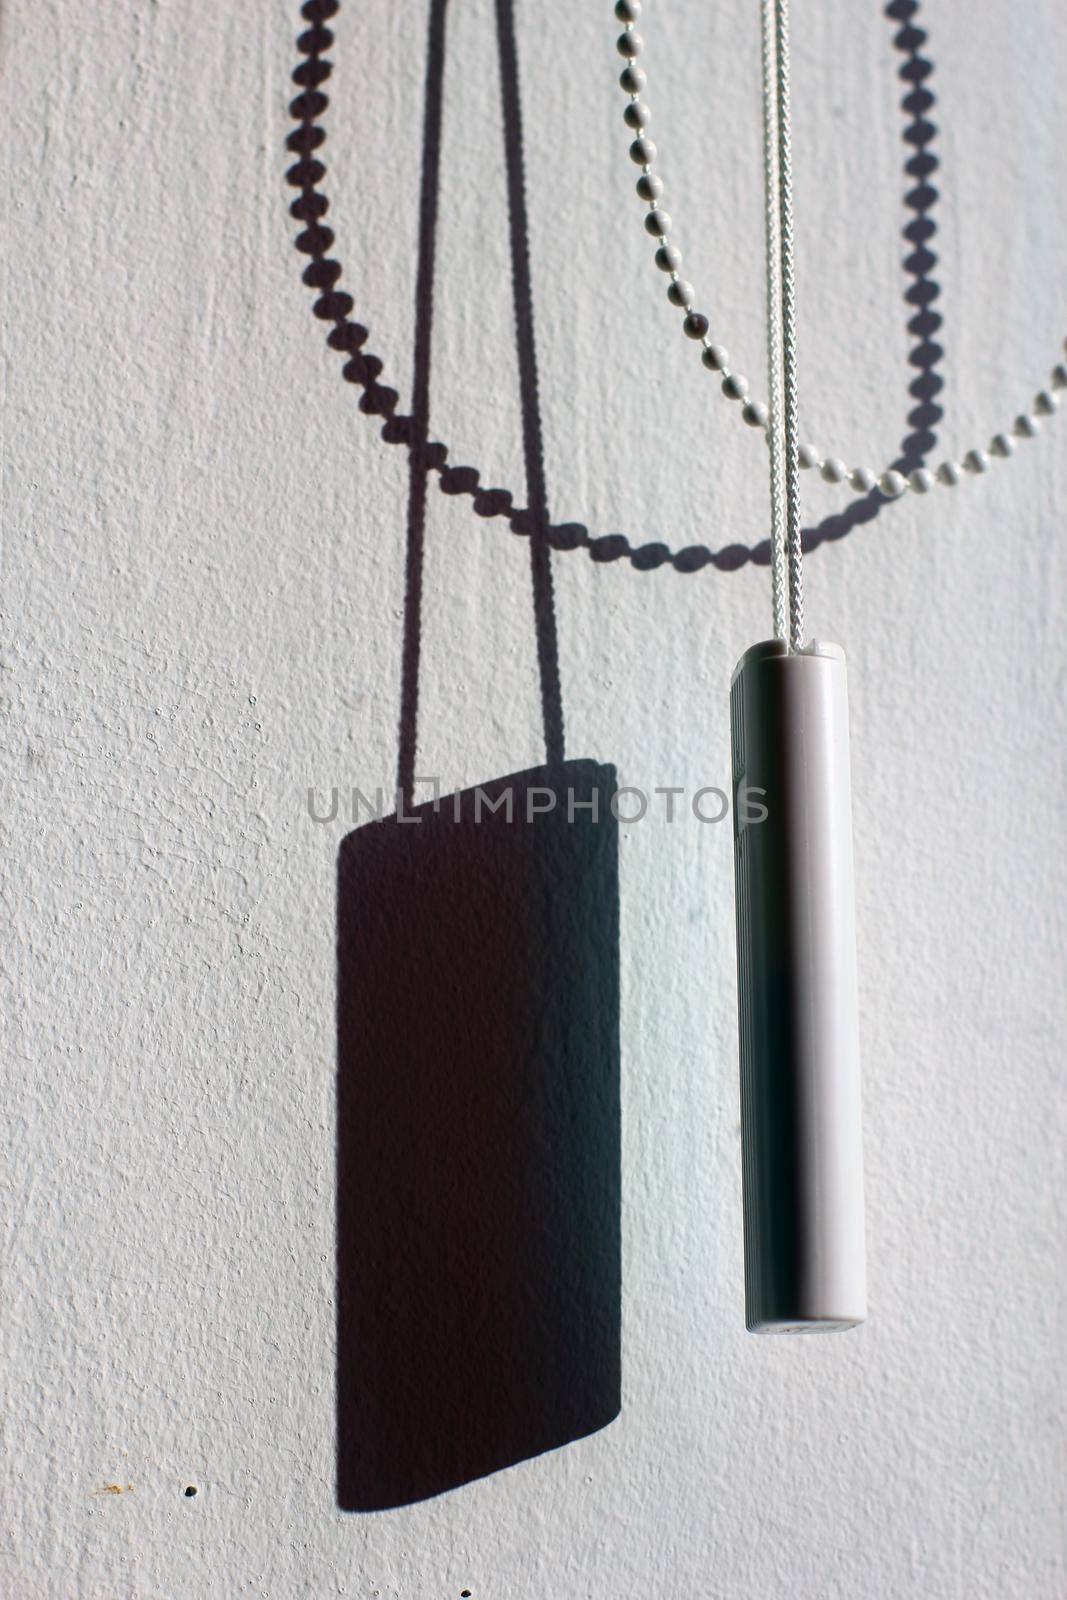 Abstract background with window blinds cord lift and chain projecting shadow over a grunge white wall